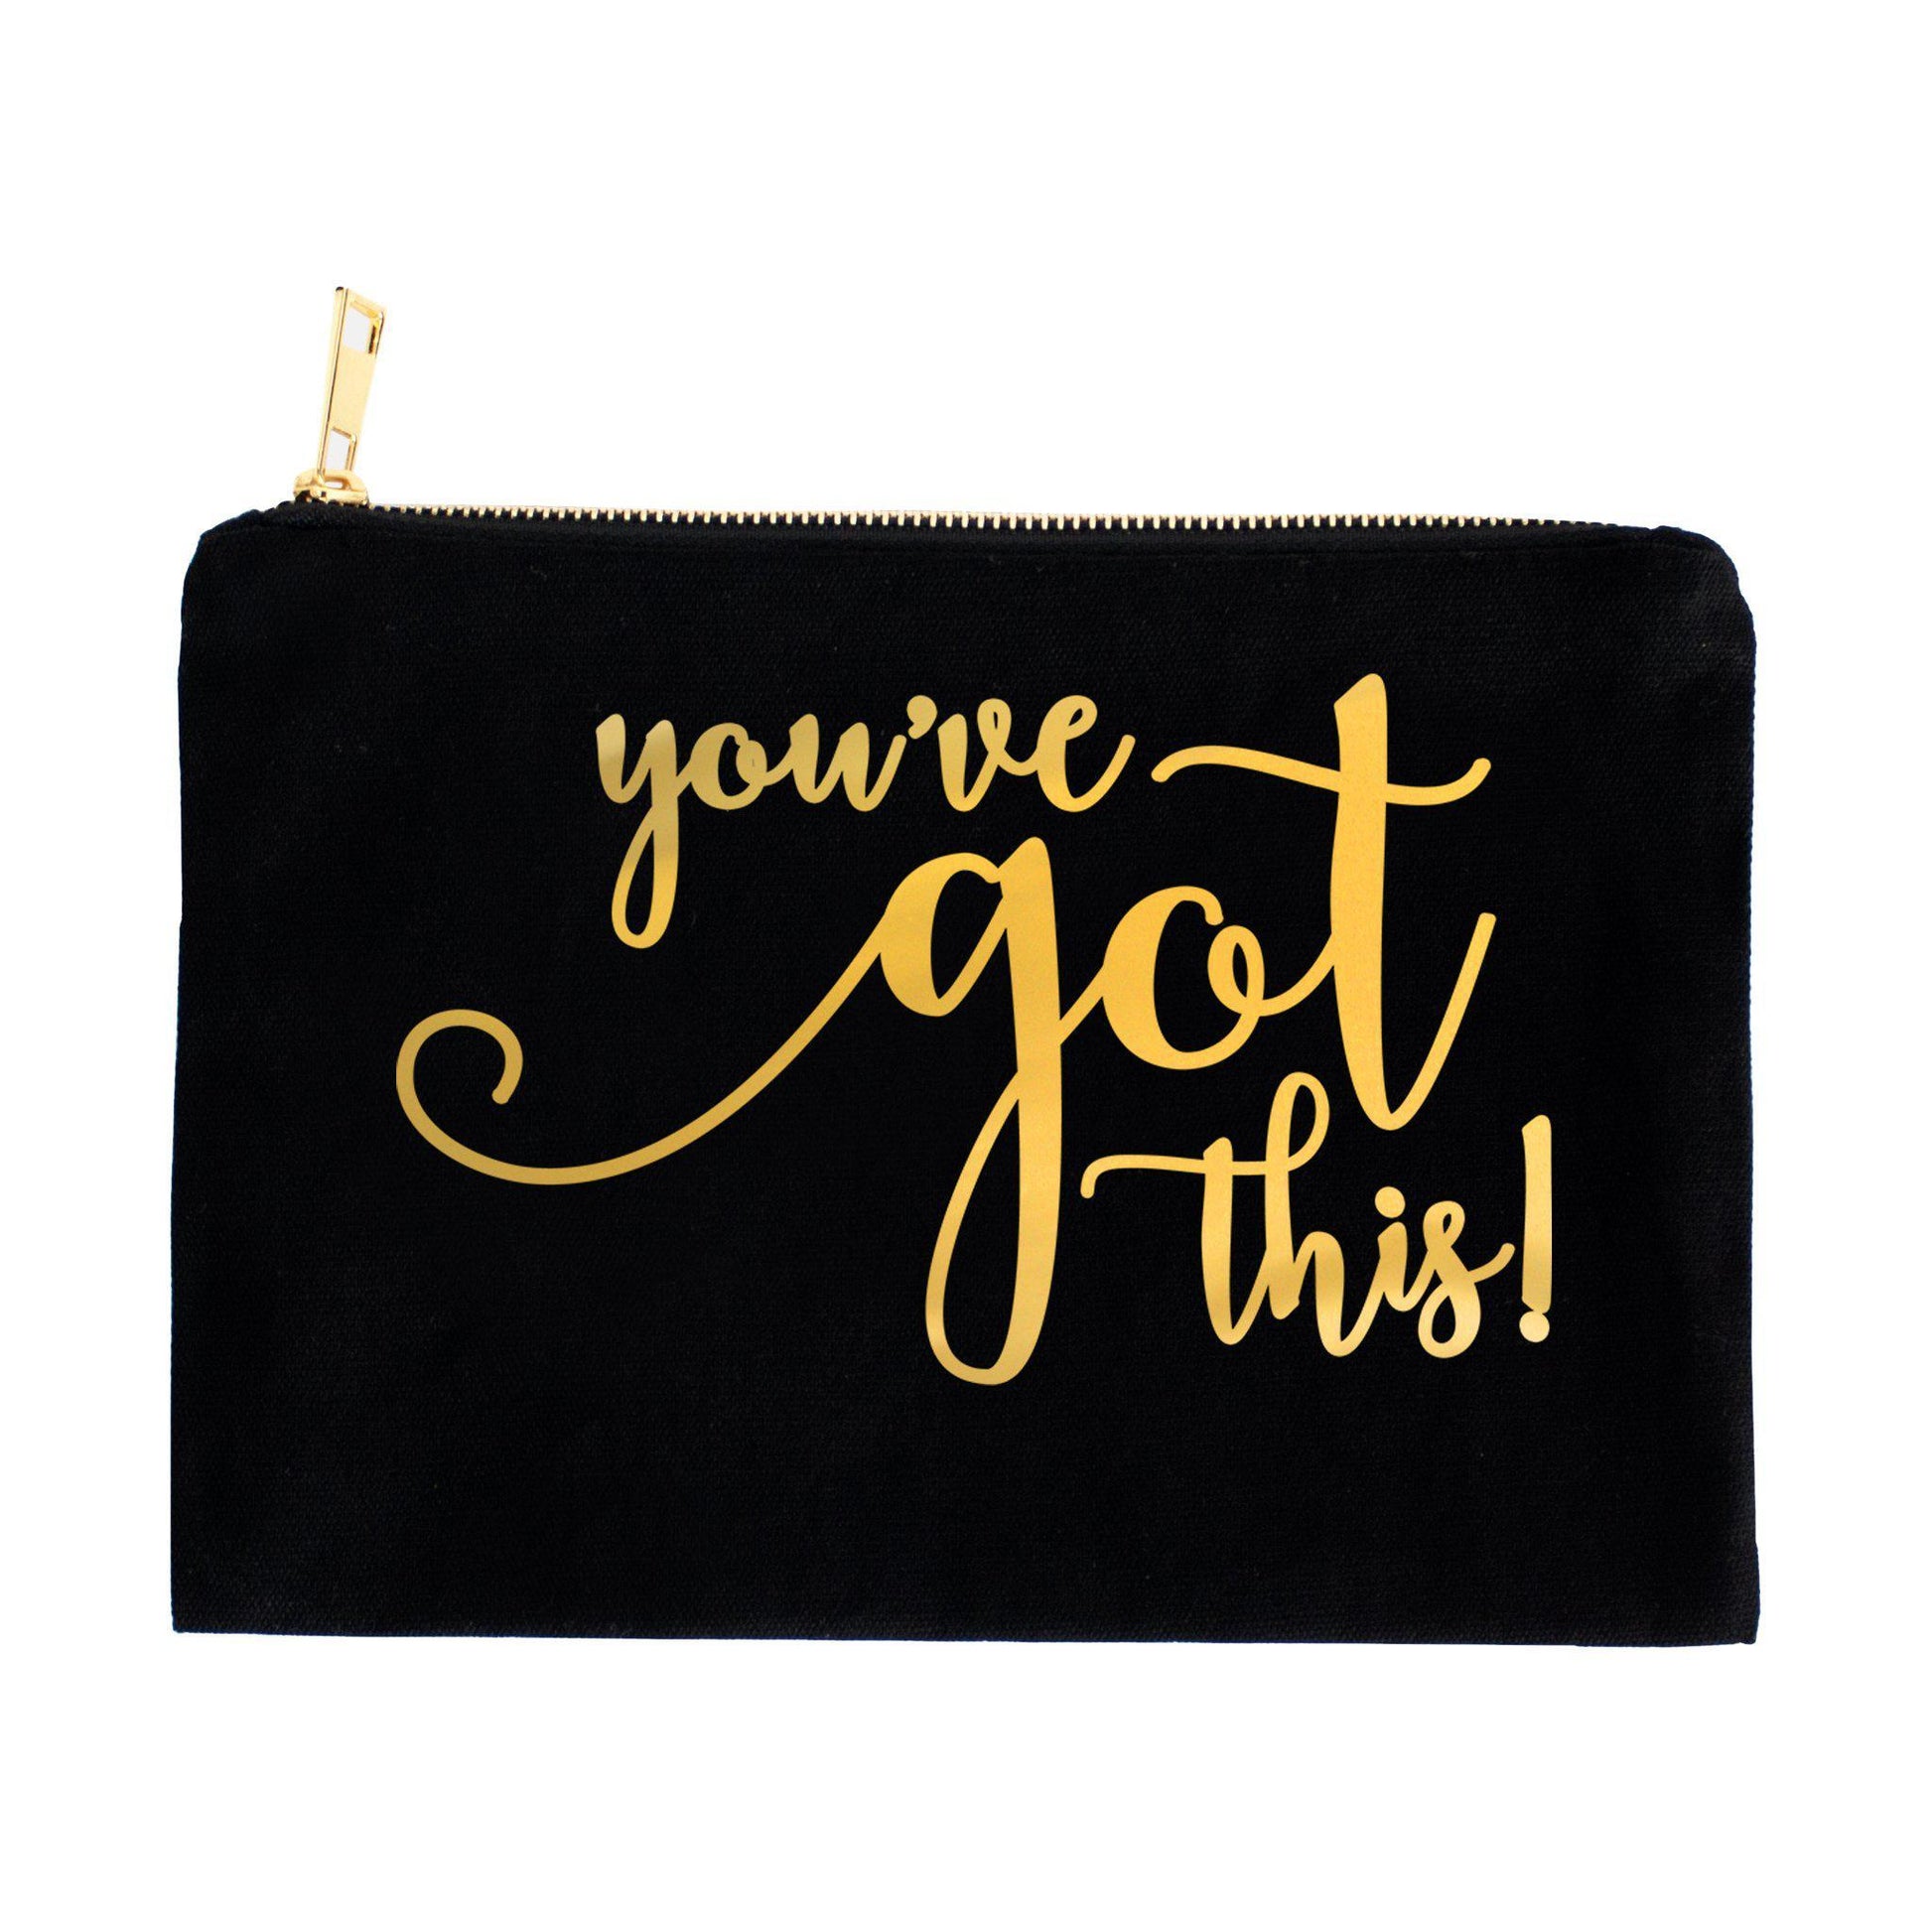 You've Got This Gold or Silver Foil Canvas Pouch in Black, Pink, or White-Luxe Palette